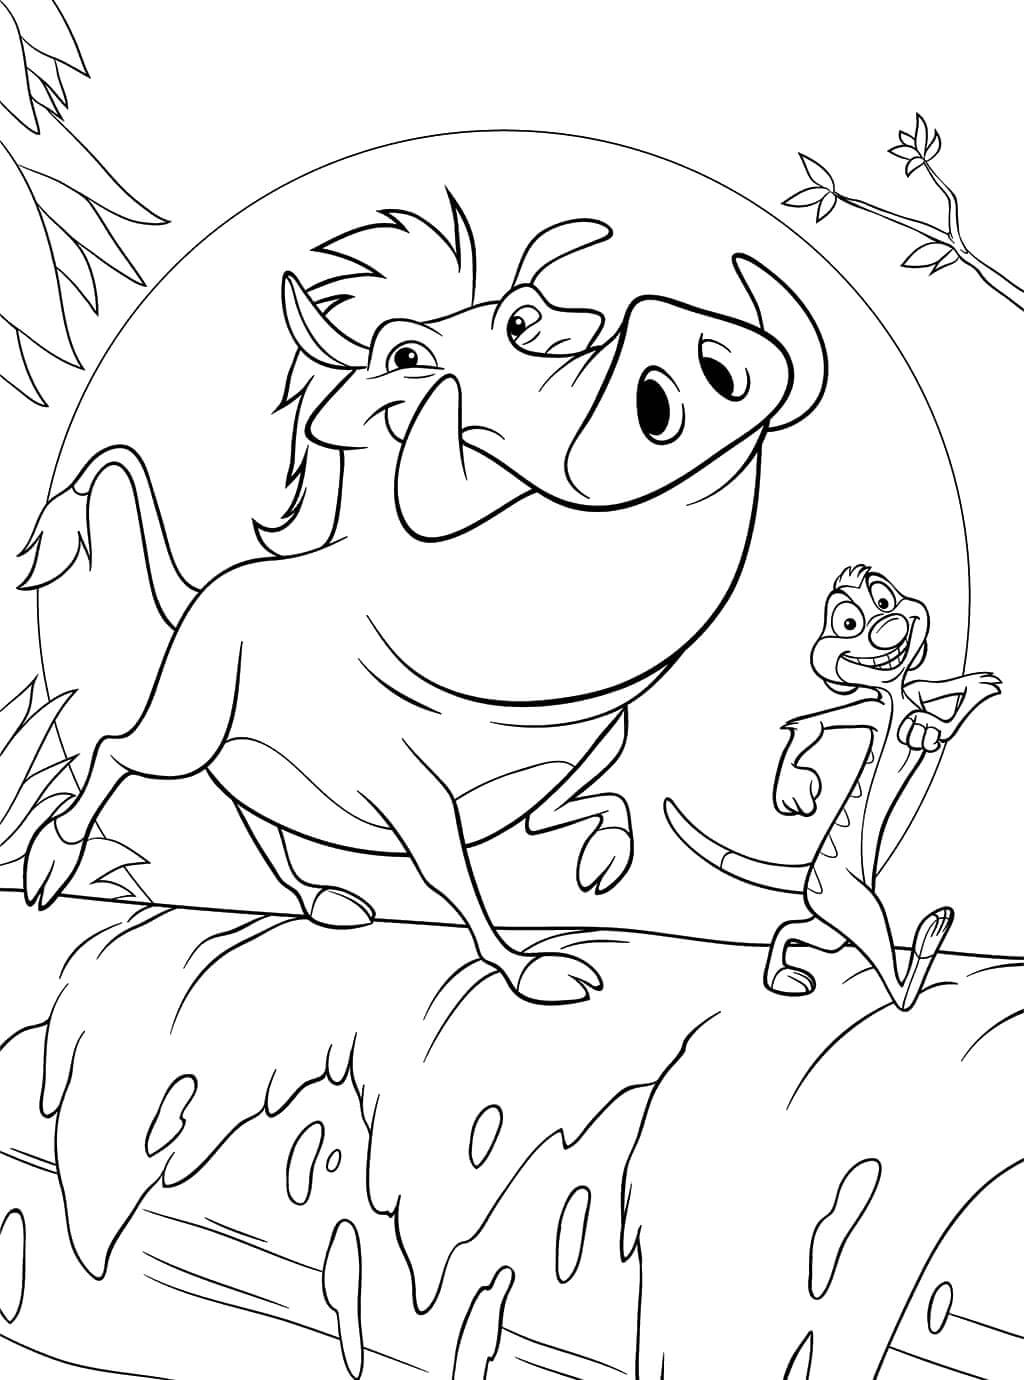 Timon and Pumbaa Walking coloring page - Download, Print or Color ...